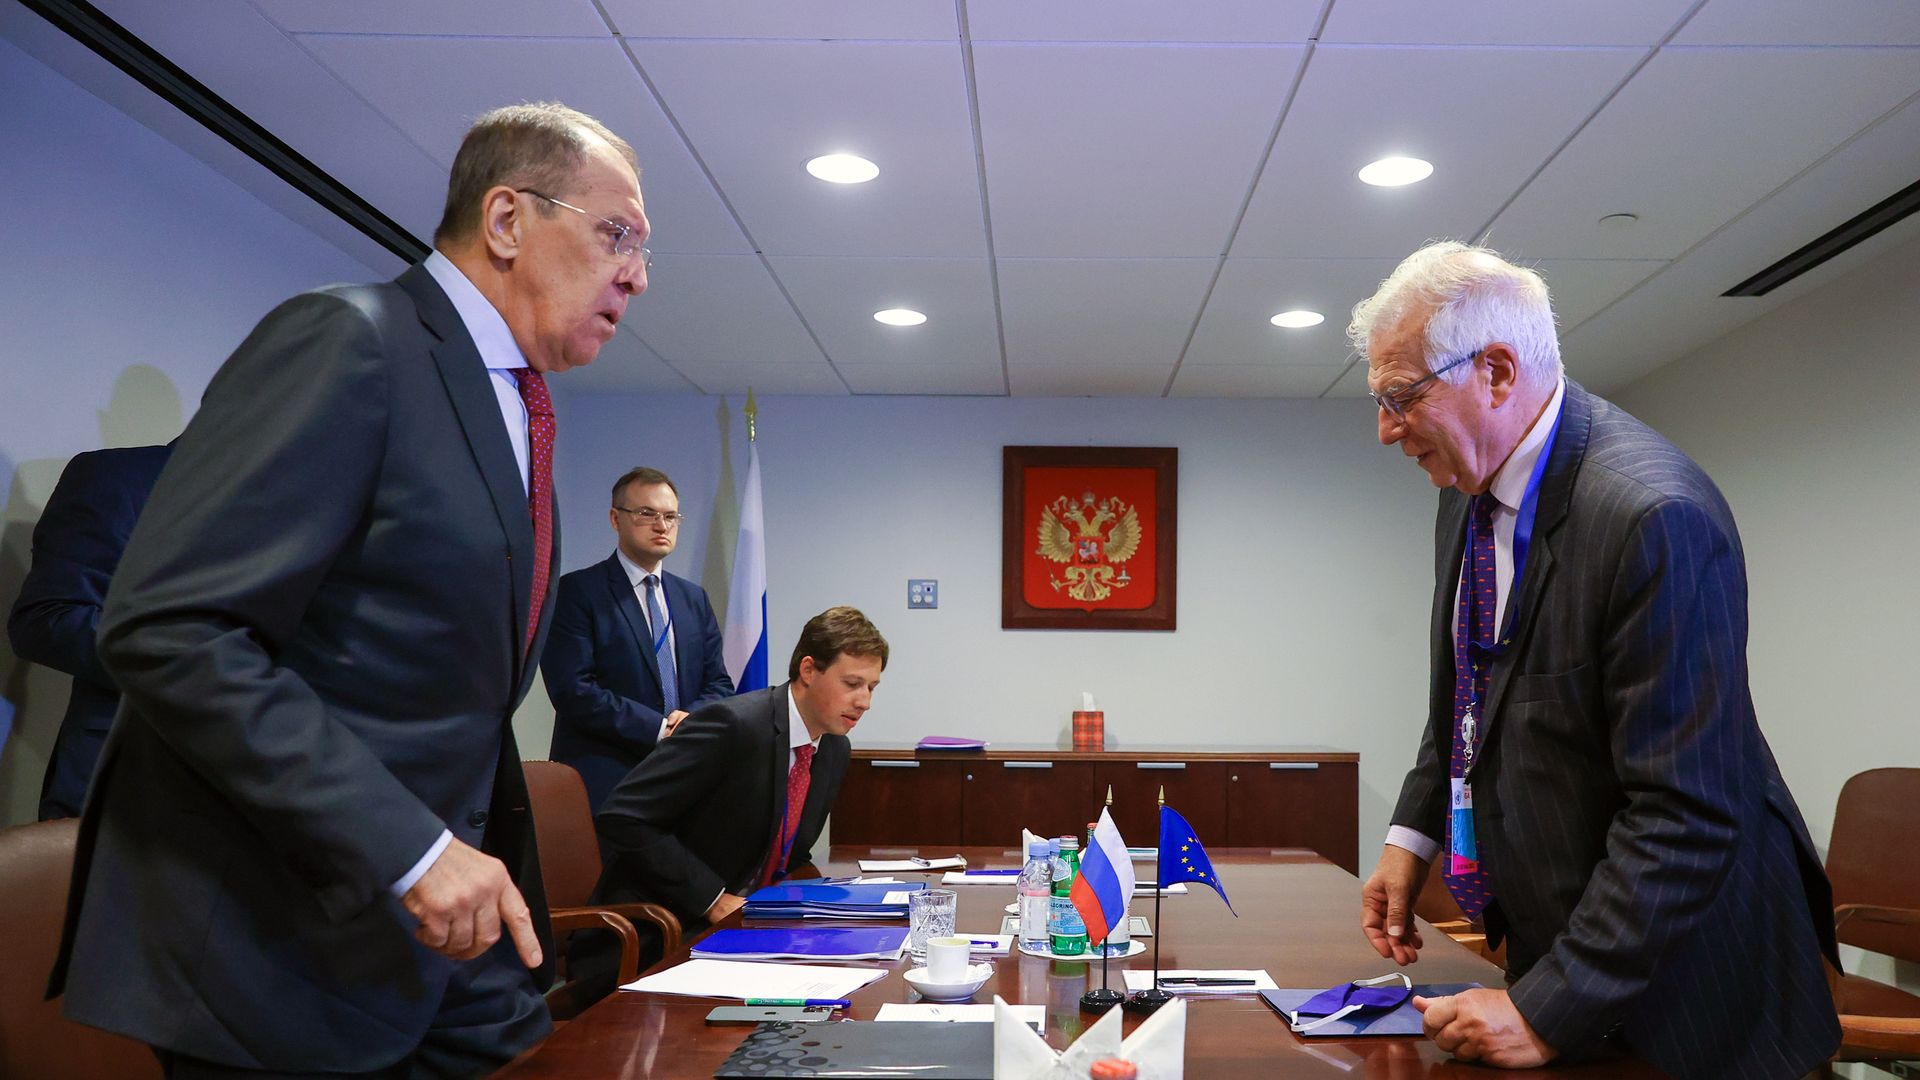 Russia's Foreign Minister Sergei Lavrov (L) and European Union High Representative for Foreign Affairs and Security Policy Josep Borrell